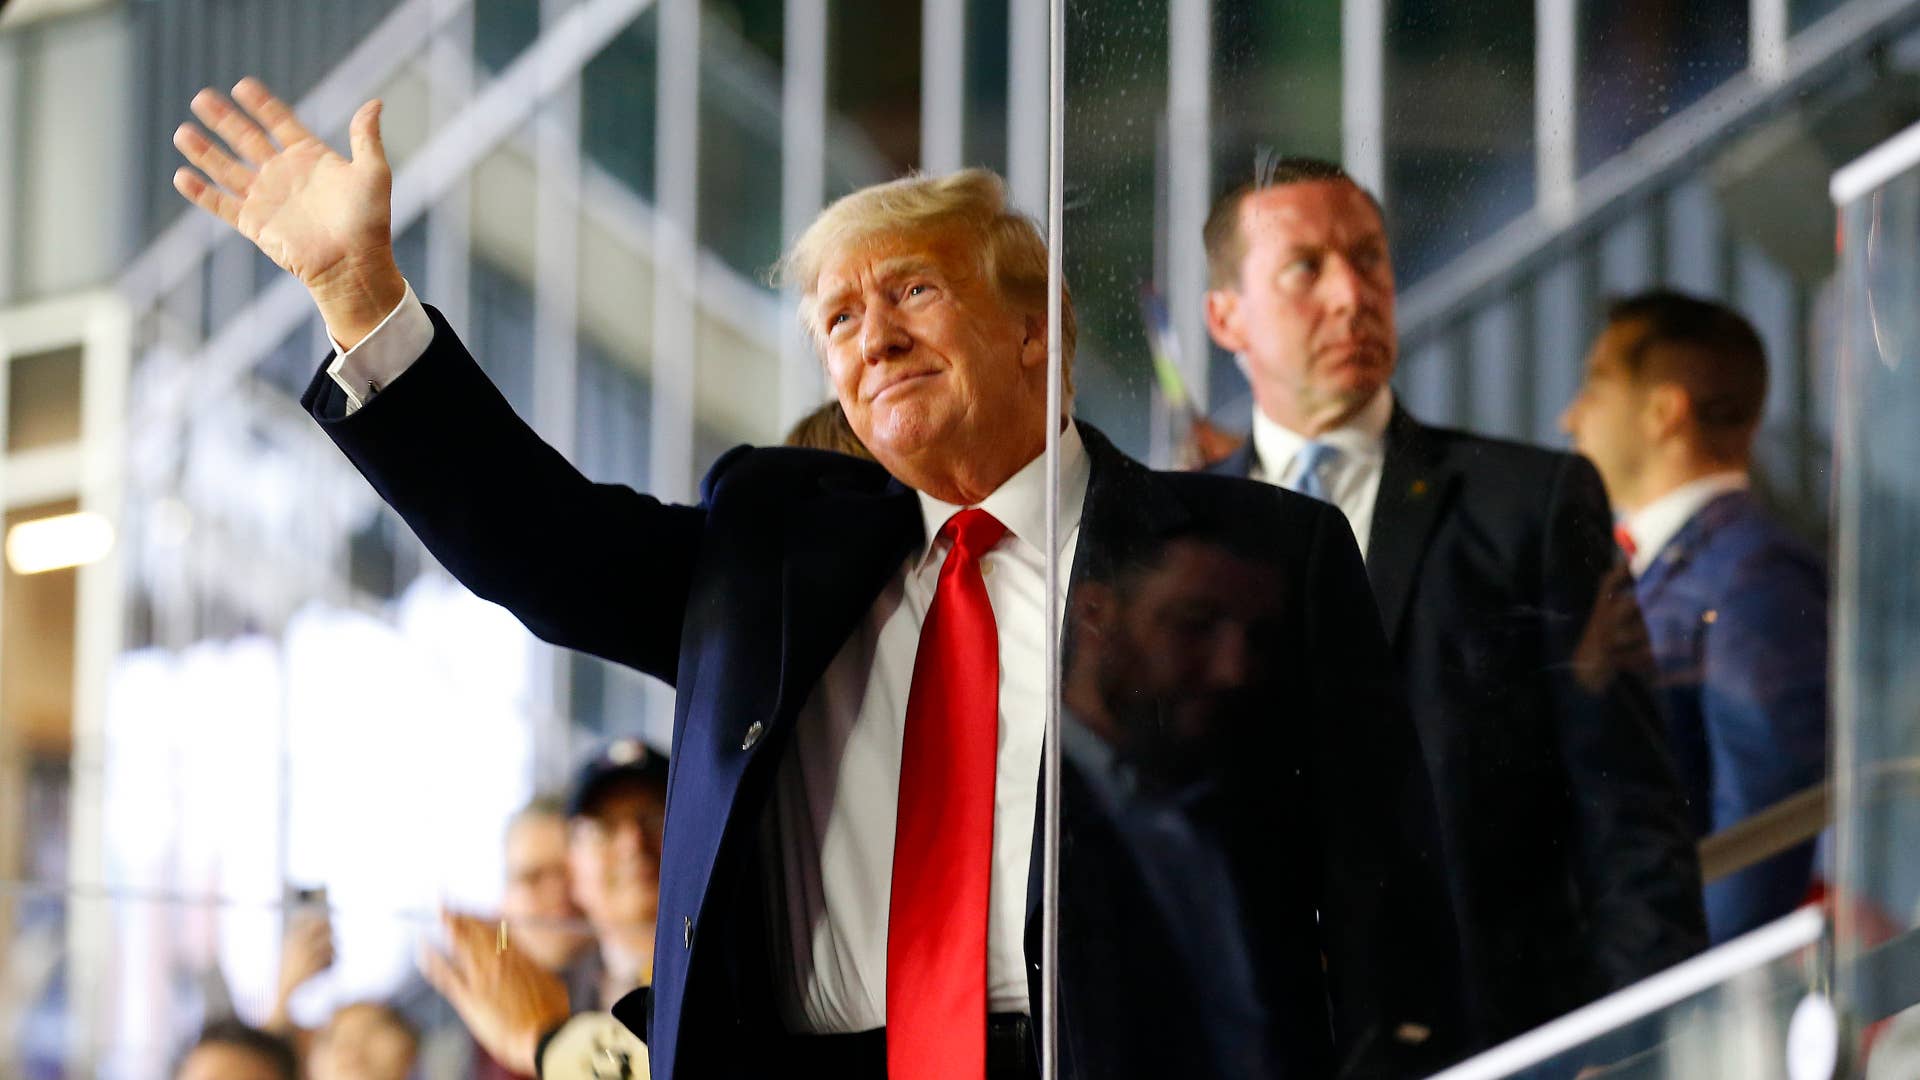 Former POTUS Donald Trump is pictured waving his hand